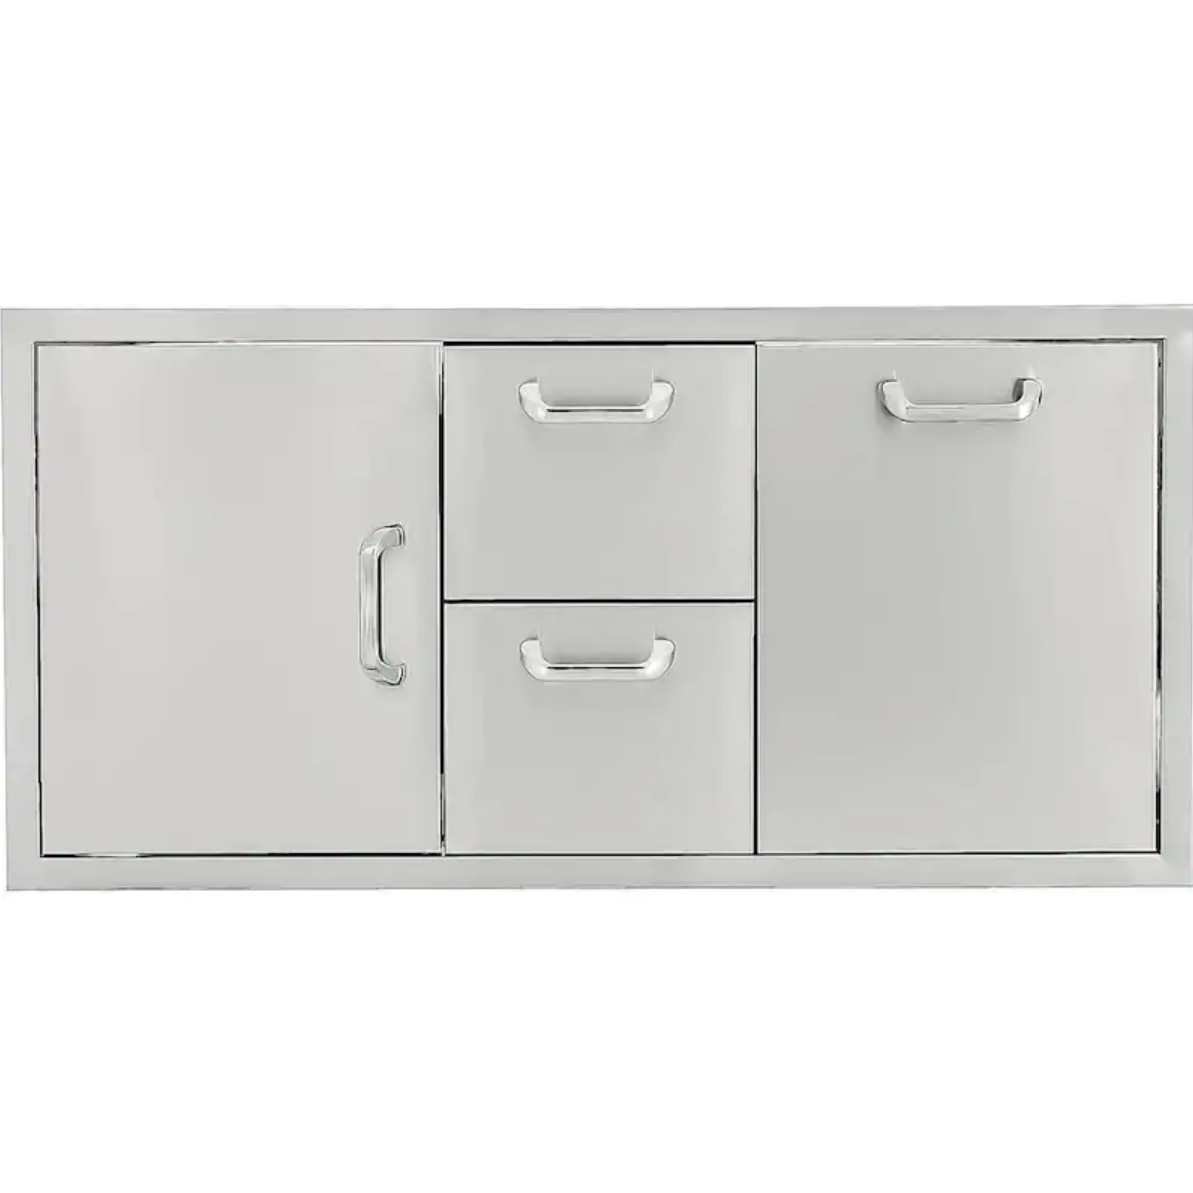 PCM 260 Series 42" Stainless Steel Door, Double Drawer & Roll-Out Trash Bin Combo